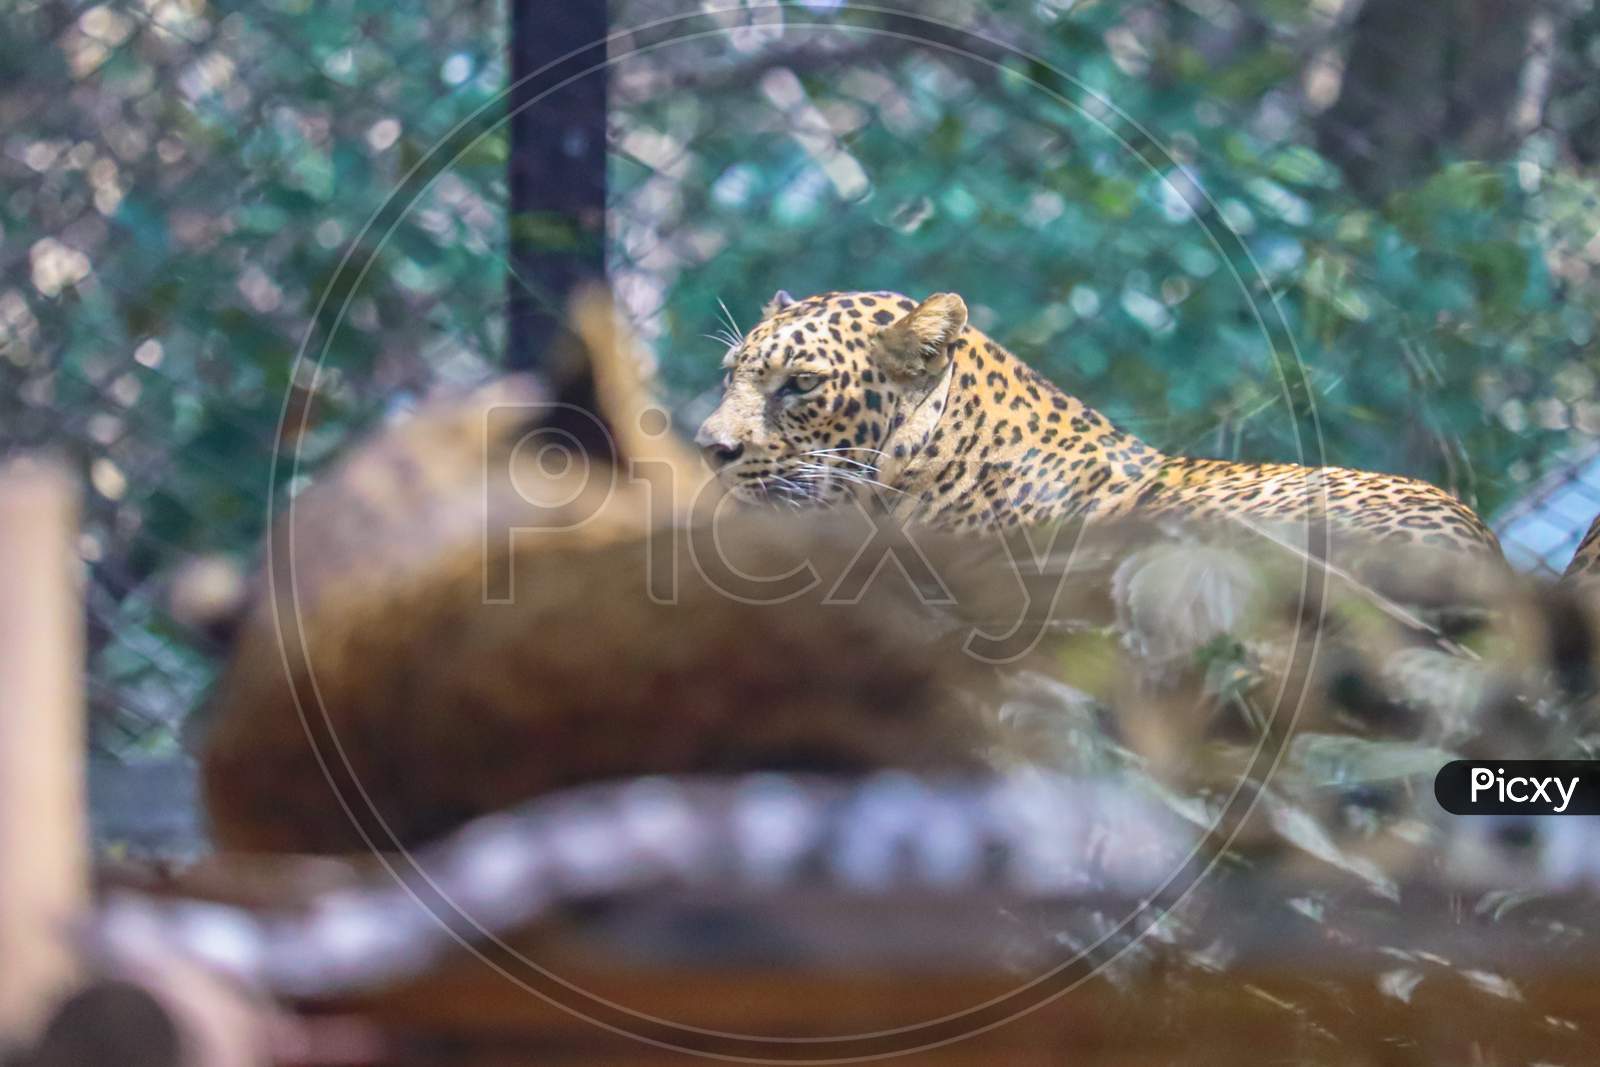 THIS IS A PHOTO OF Leopard IN ZOO